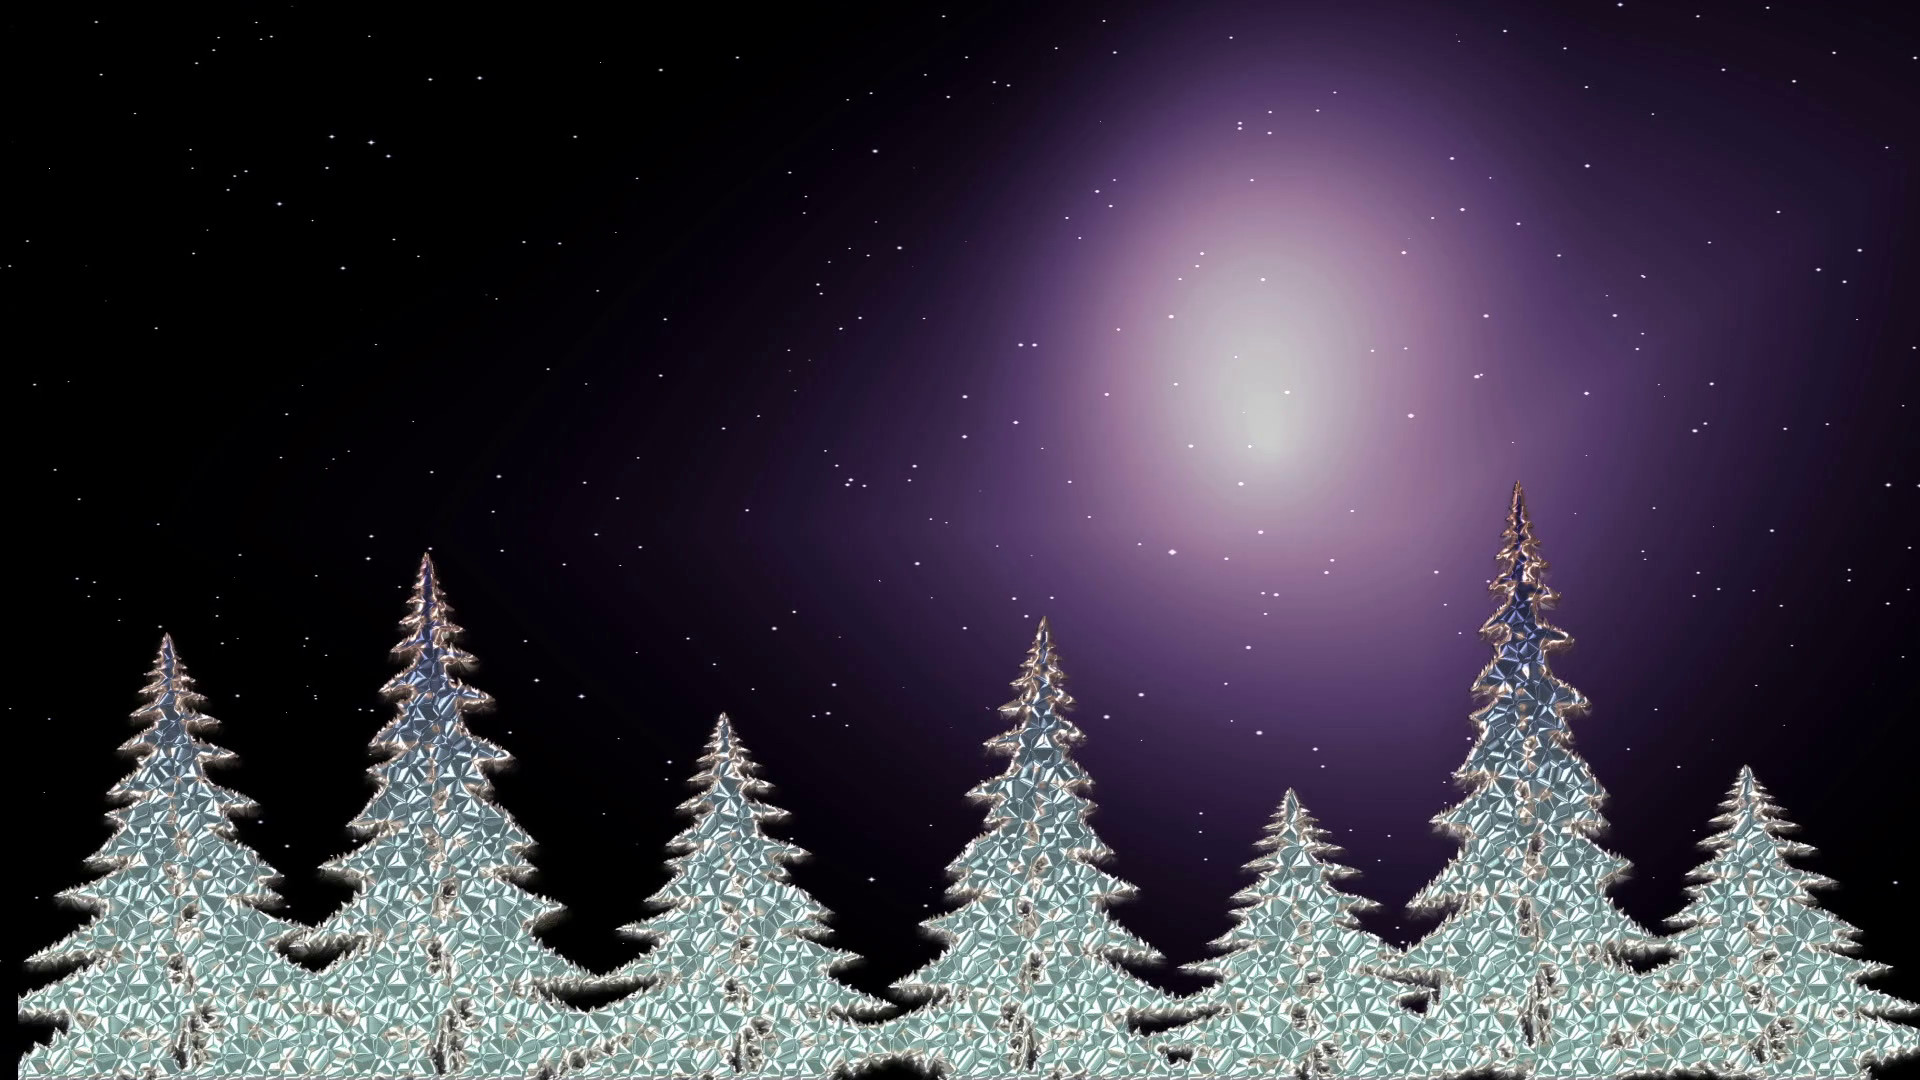 1920x1080 Sparkling Christmas trees shining in the starry night, Christmas trees in  the frosty night,